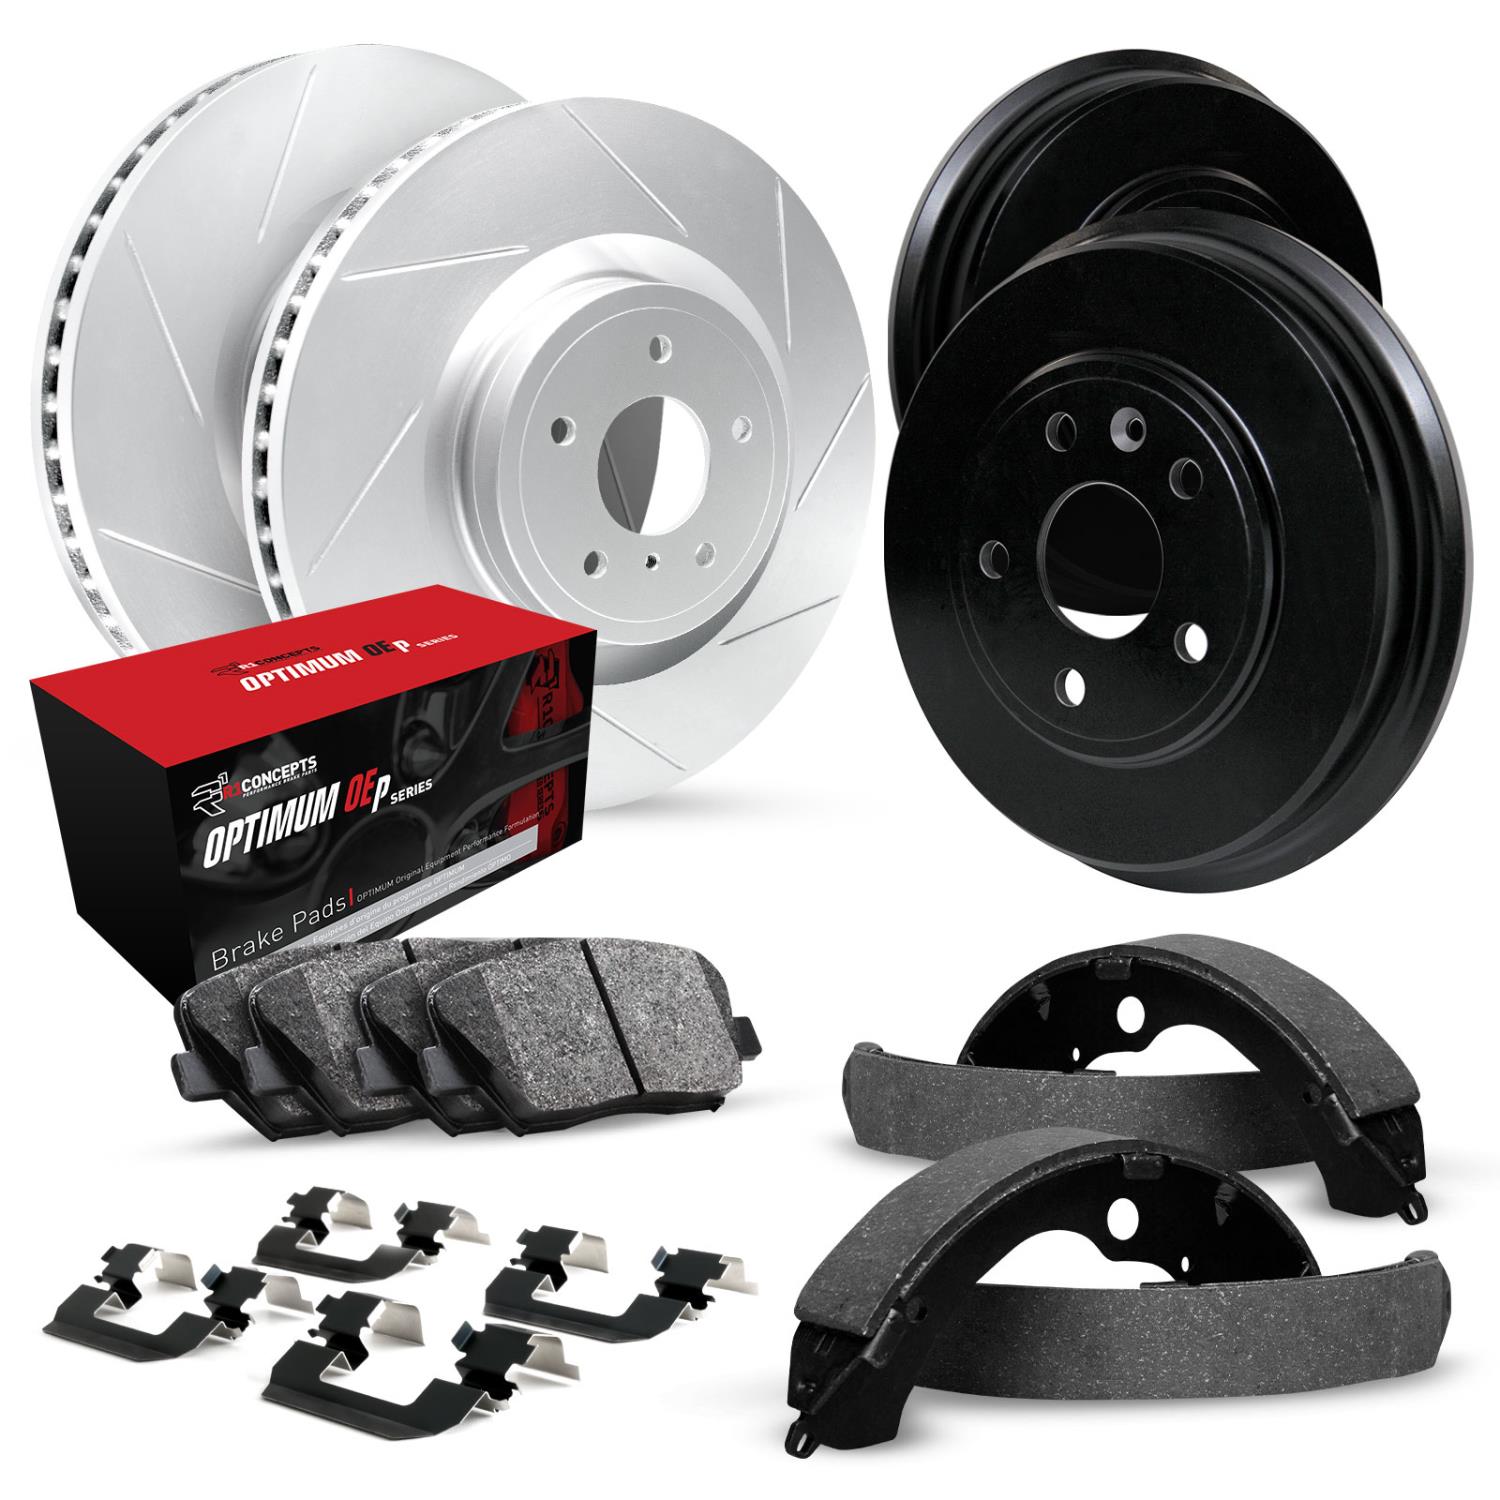 GEO-Carbon Slotted Brake Rotor & Drum Set w/Optimum OE Pads, Shoes, & Hardware, 1991-1996 GM, Position: Front & Rear